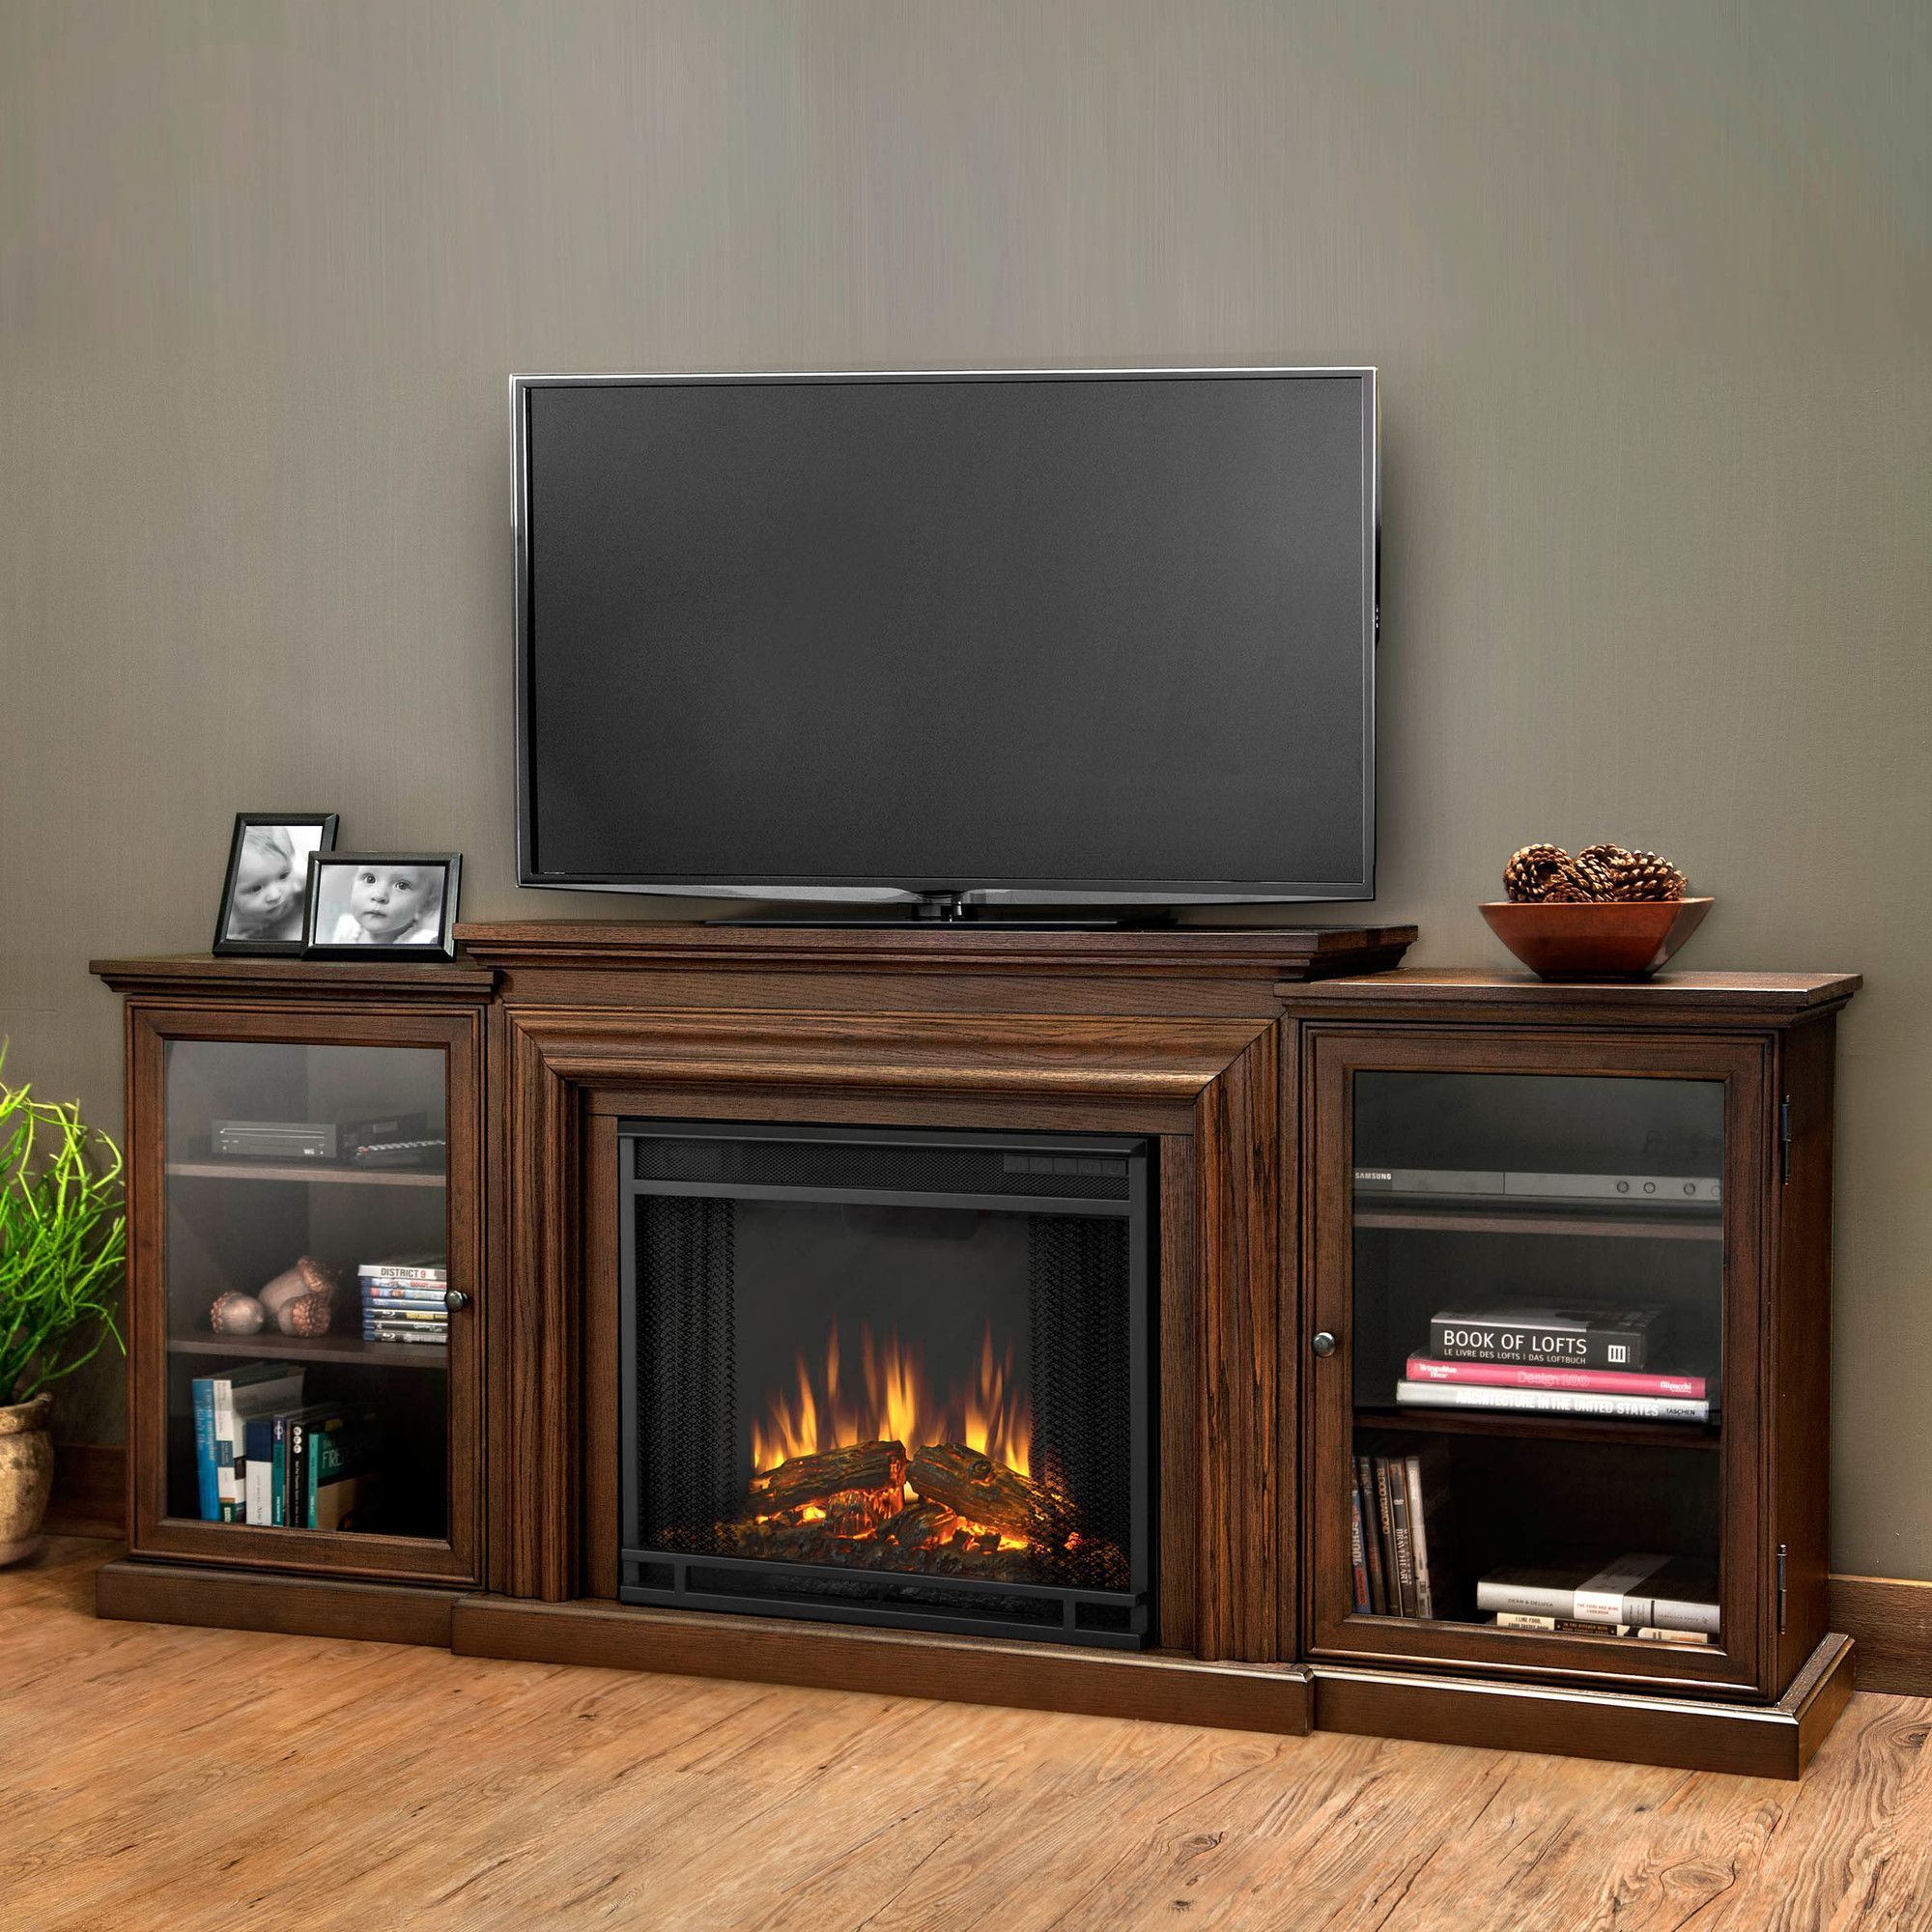 Frederick Tv Stand For Tvs Up To 78" With Fireplace Within Neilsen Tv Stands For Tvs Up To 50" With Fireplace Included (View 9 of 15)